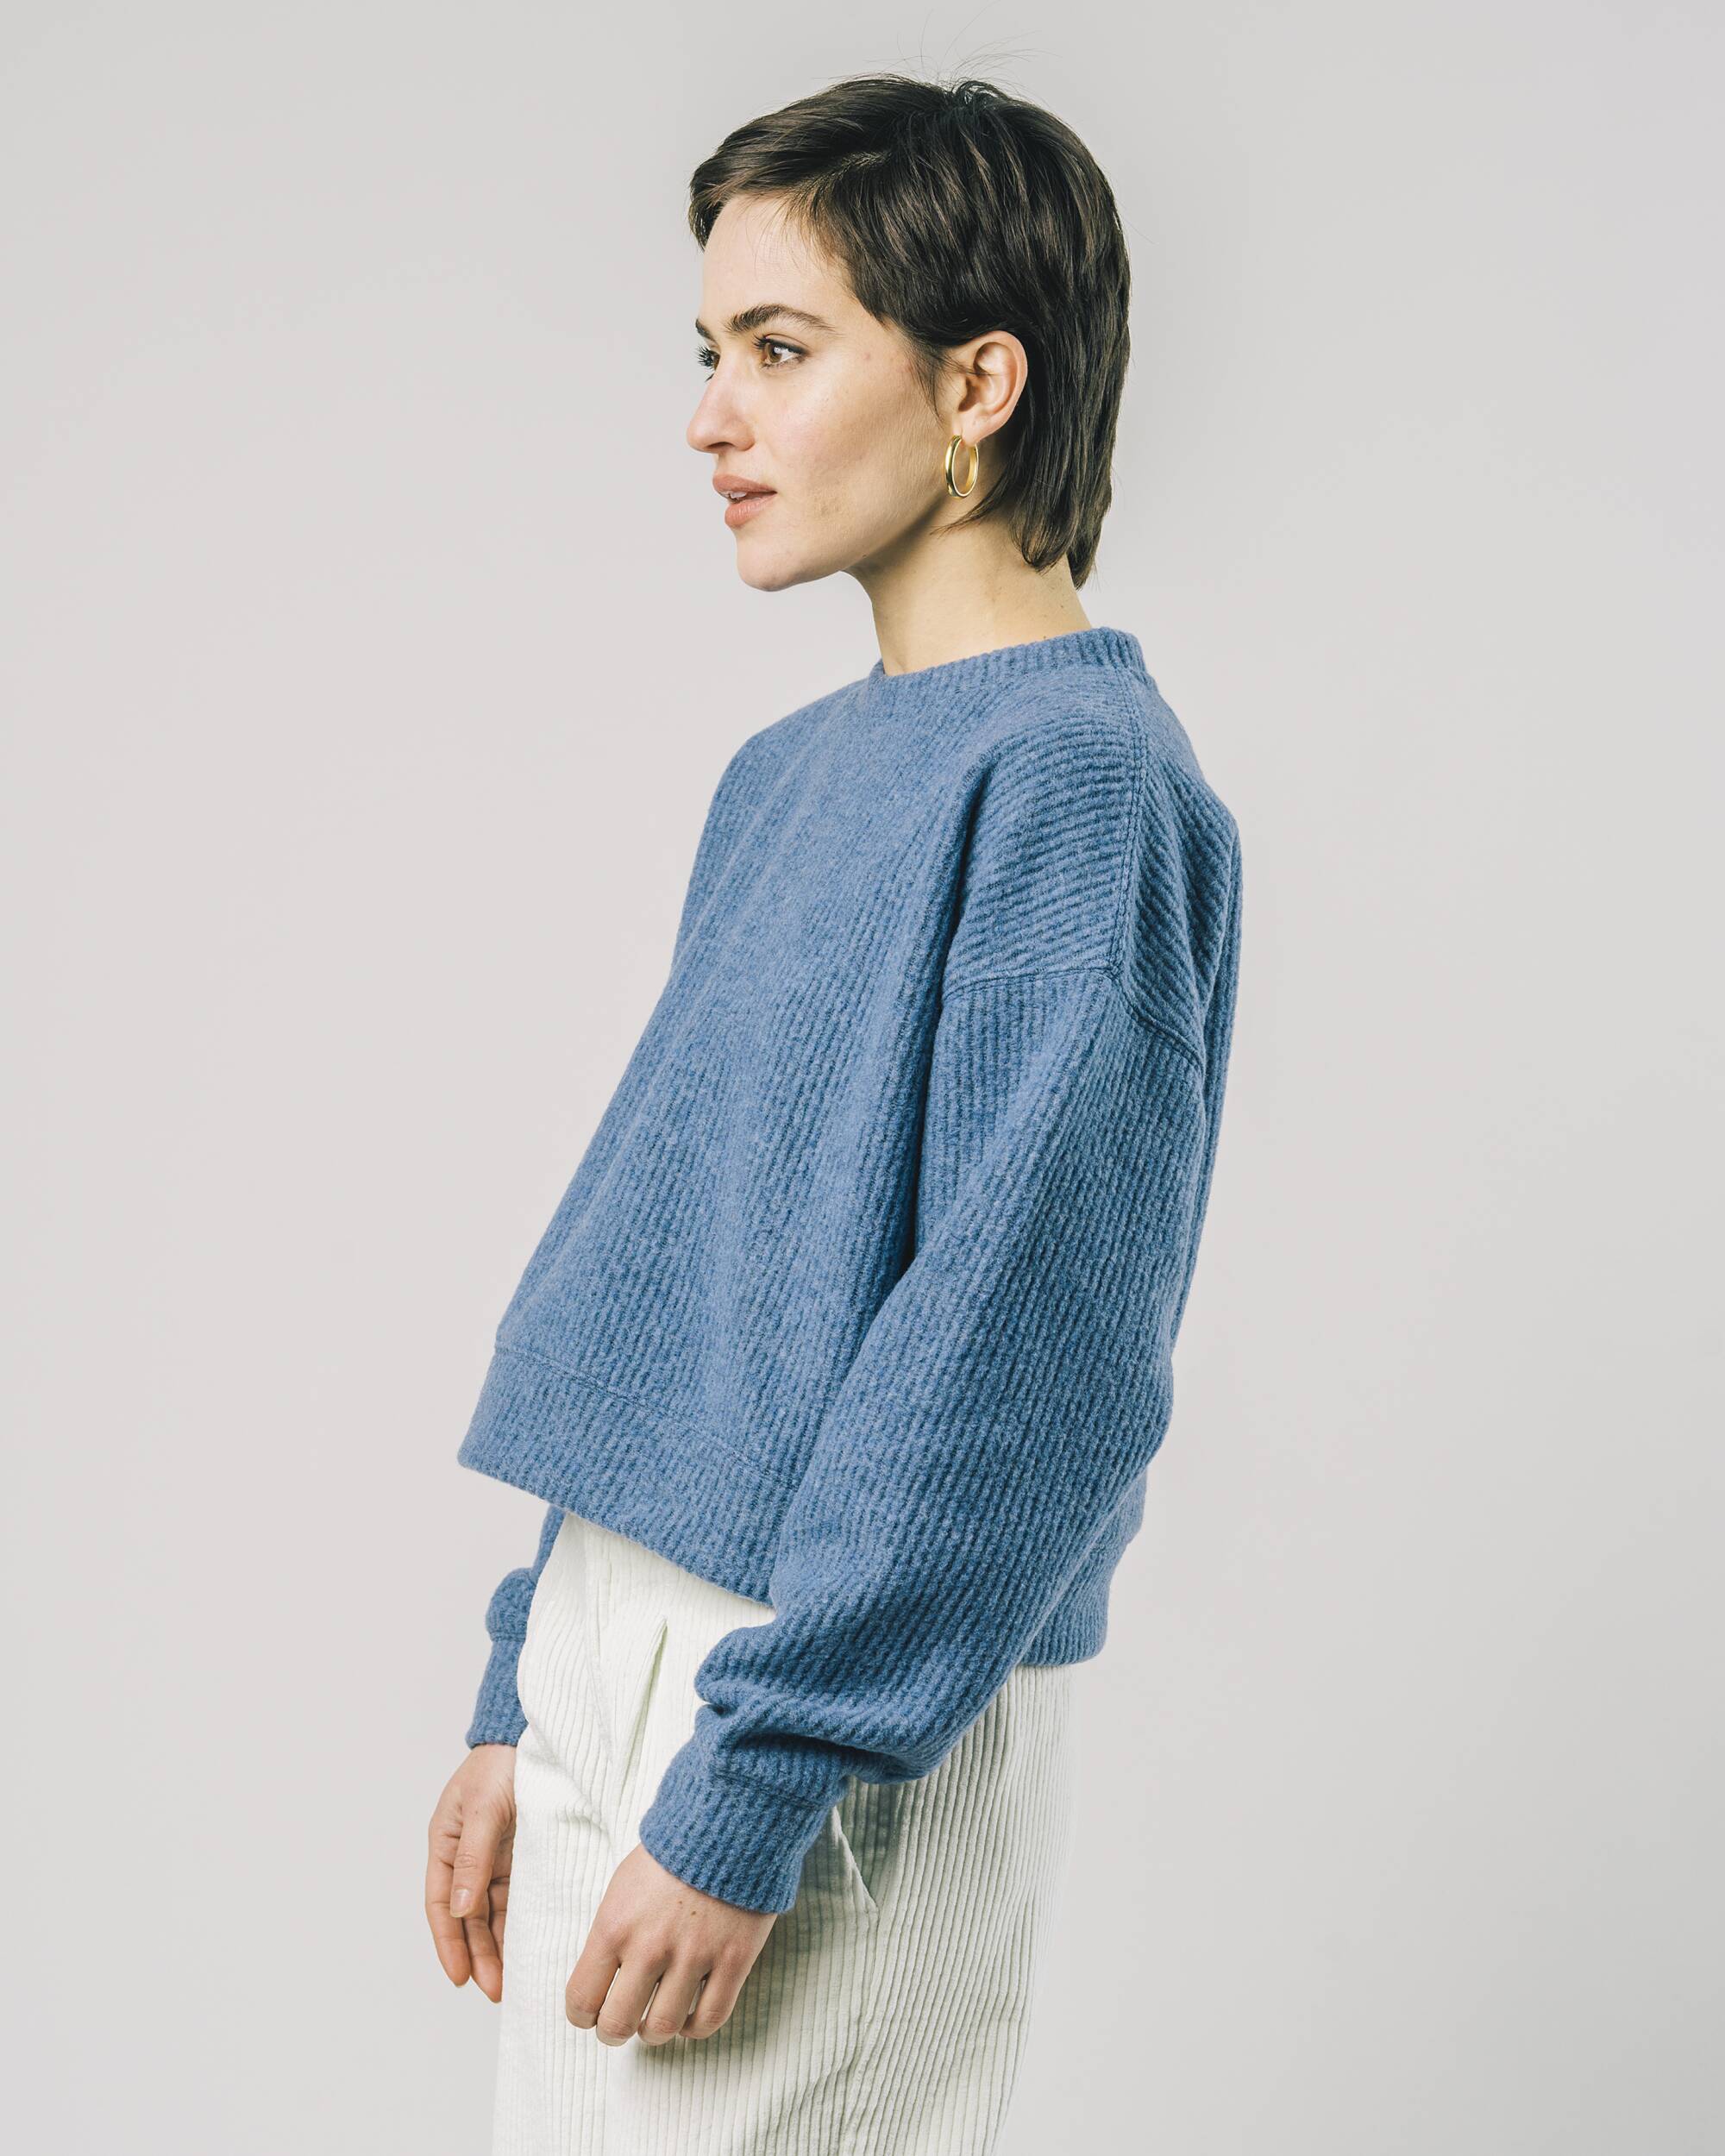 Cropped sweater in Ocean - blue made from 100% recycled materials from Brava Fabrics